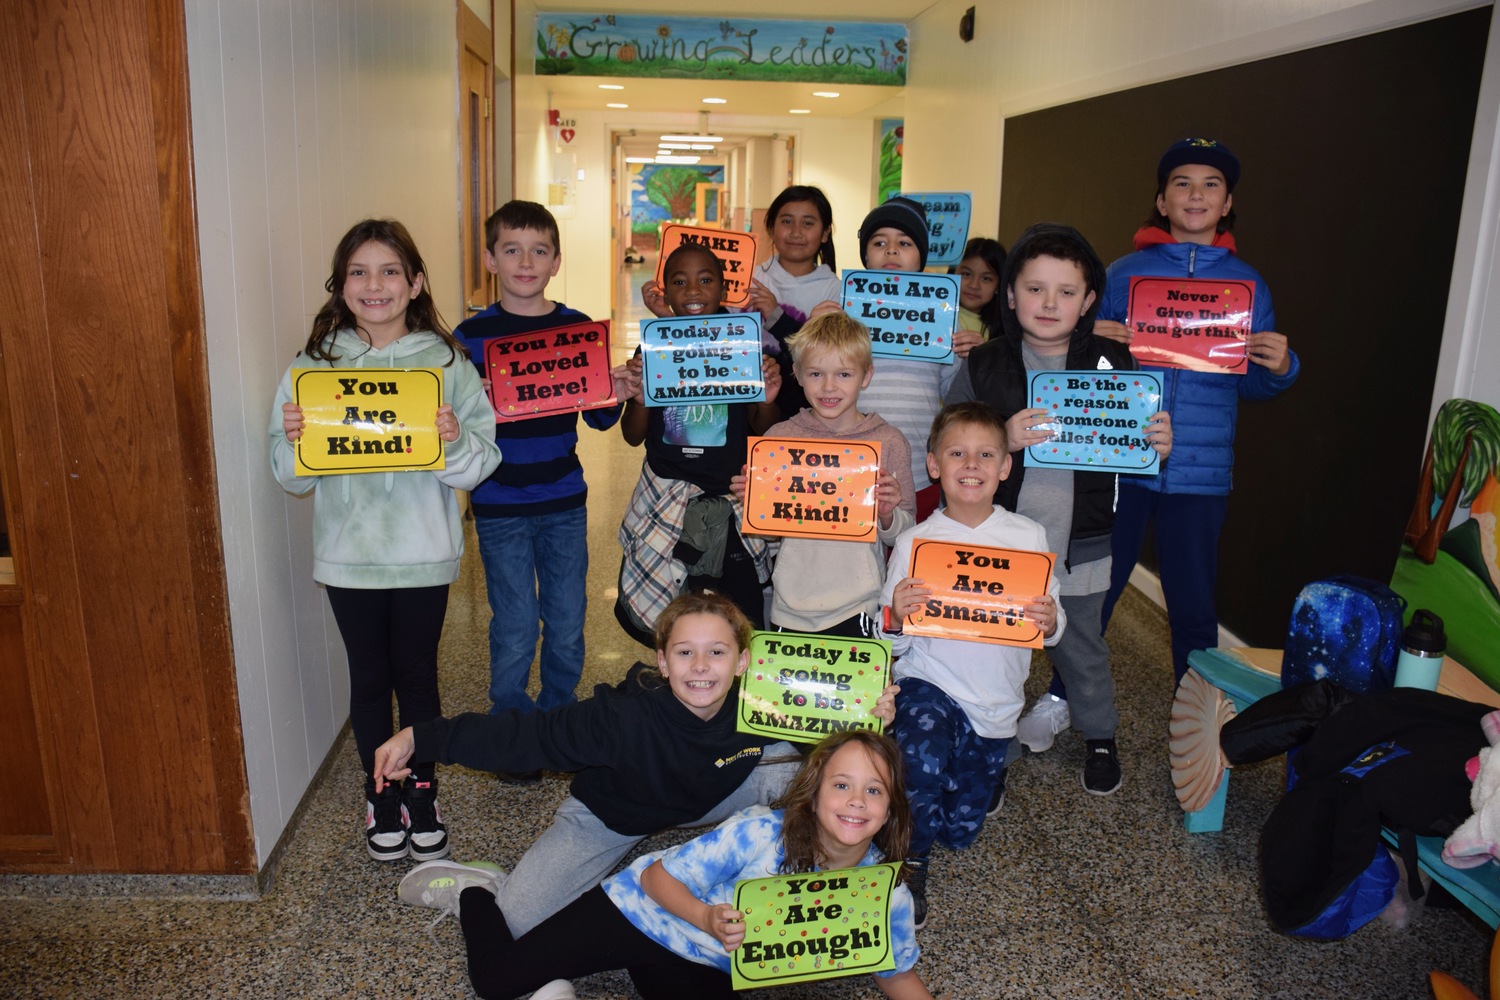 Students at Westhampton Beach Elementary School recently celebrated a week of kindness with a variety of activities. They had discussions in their classrooms about the importance of being kind to others, used chalk to write kindness messages outside their school and wrote kind letters to teachers and staff. COURTESY WESTHAMPTON BEACH SCHOOL DISTRICT